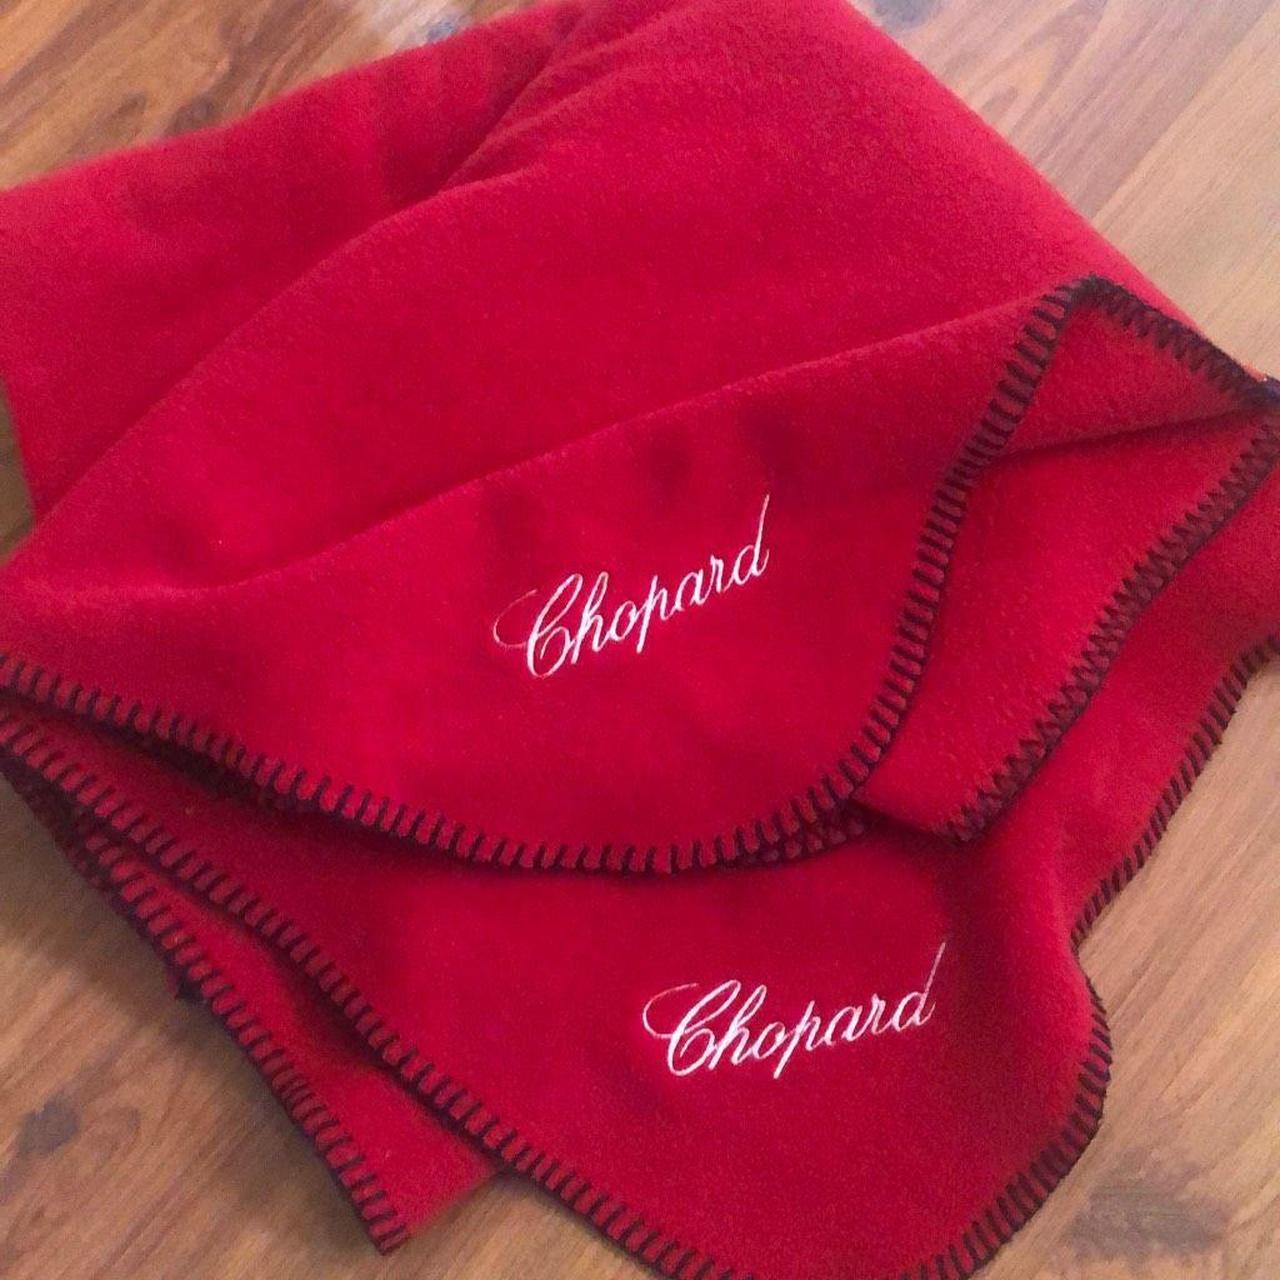 Chopard Red and Black Soft-furnishings-textiles